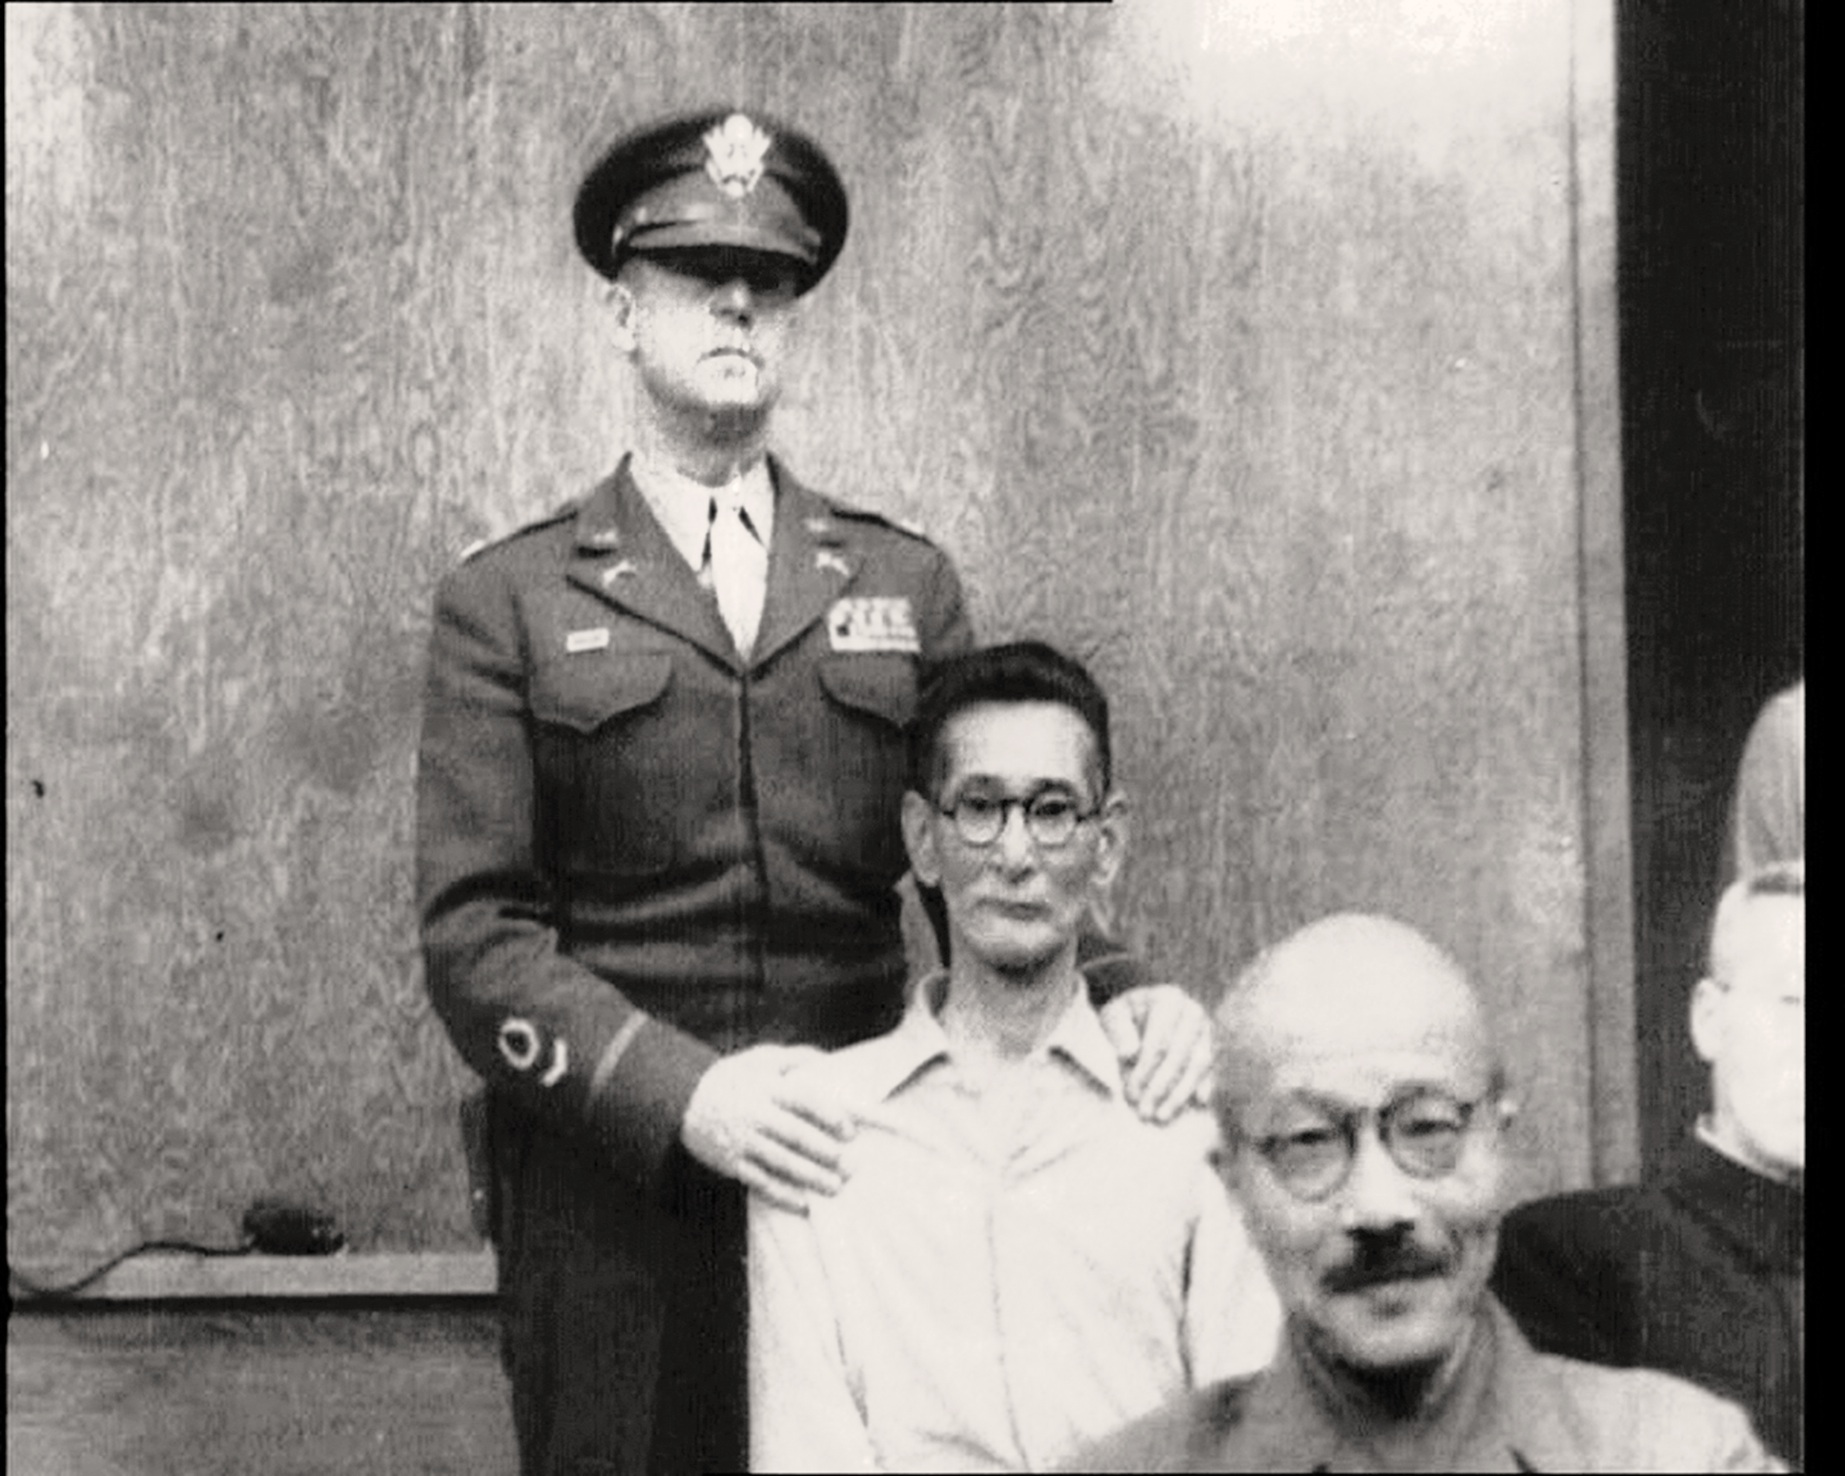 Slap happy: Shumei Okawa (center) is restrained  after slapping former Prime Minister Hideki Tojo (front) on the head on May 3, 1946, at the International Military Tribunal for the Far East. | www.britishpathe.com